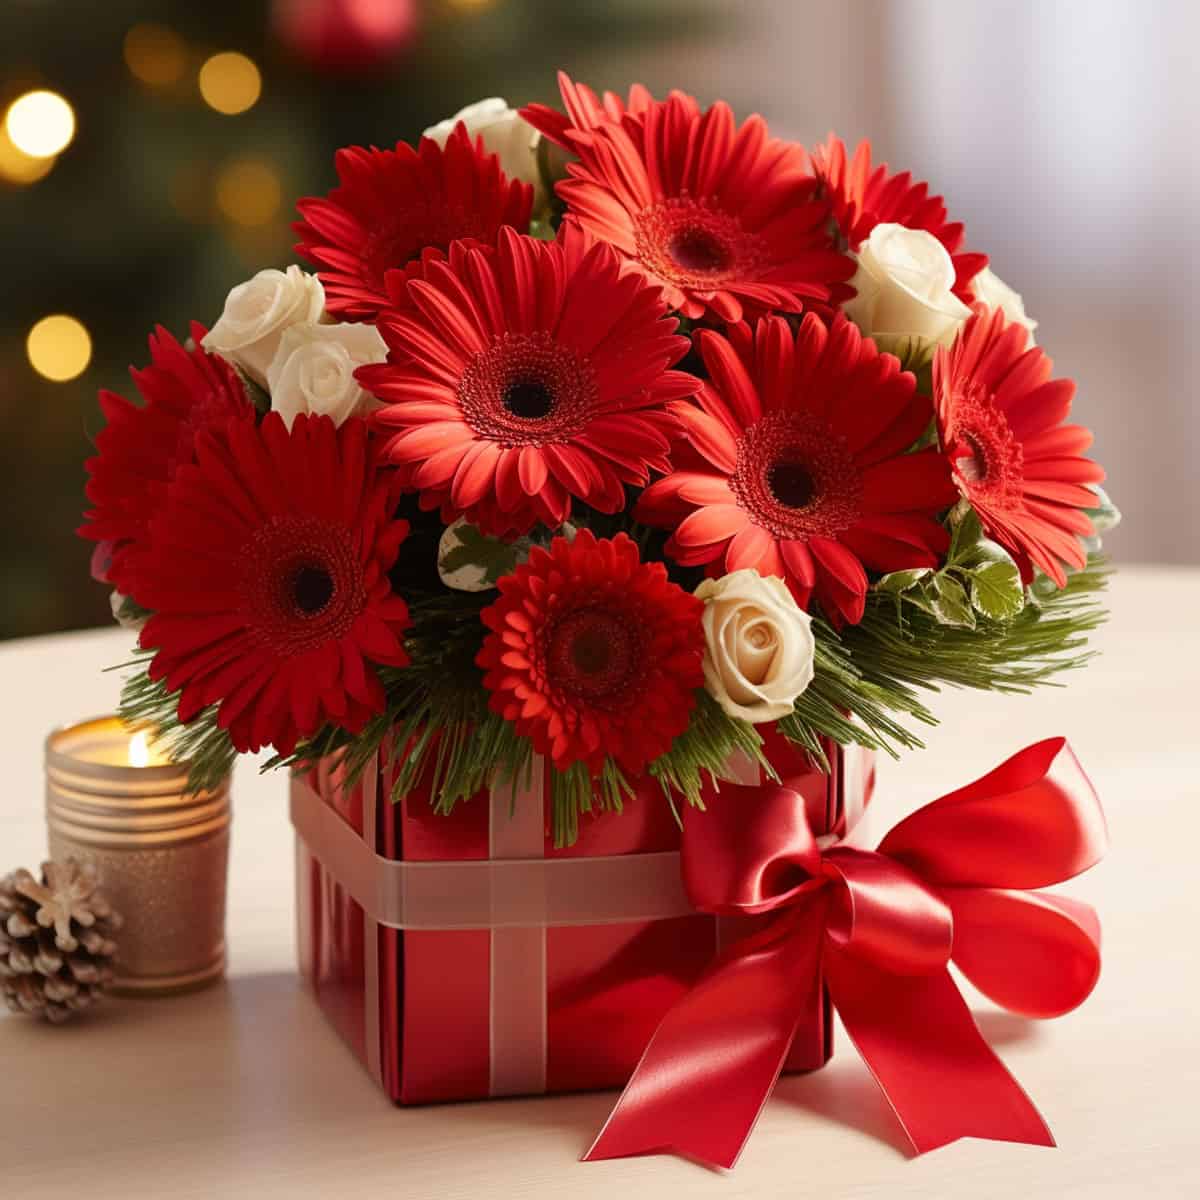 vibrant ensemble of gerbera daisies and roses for Christmas, add gifts on the sides